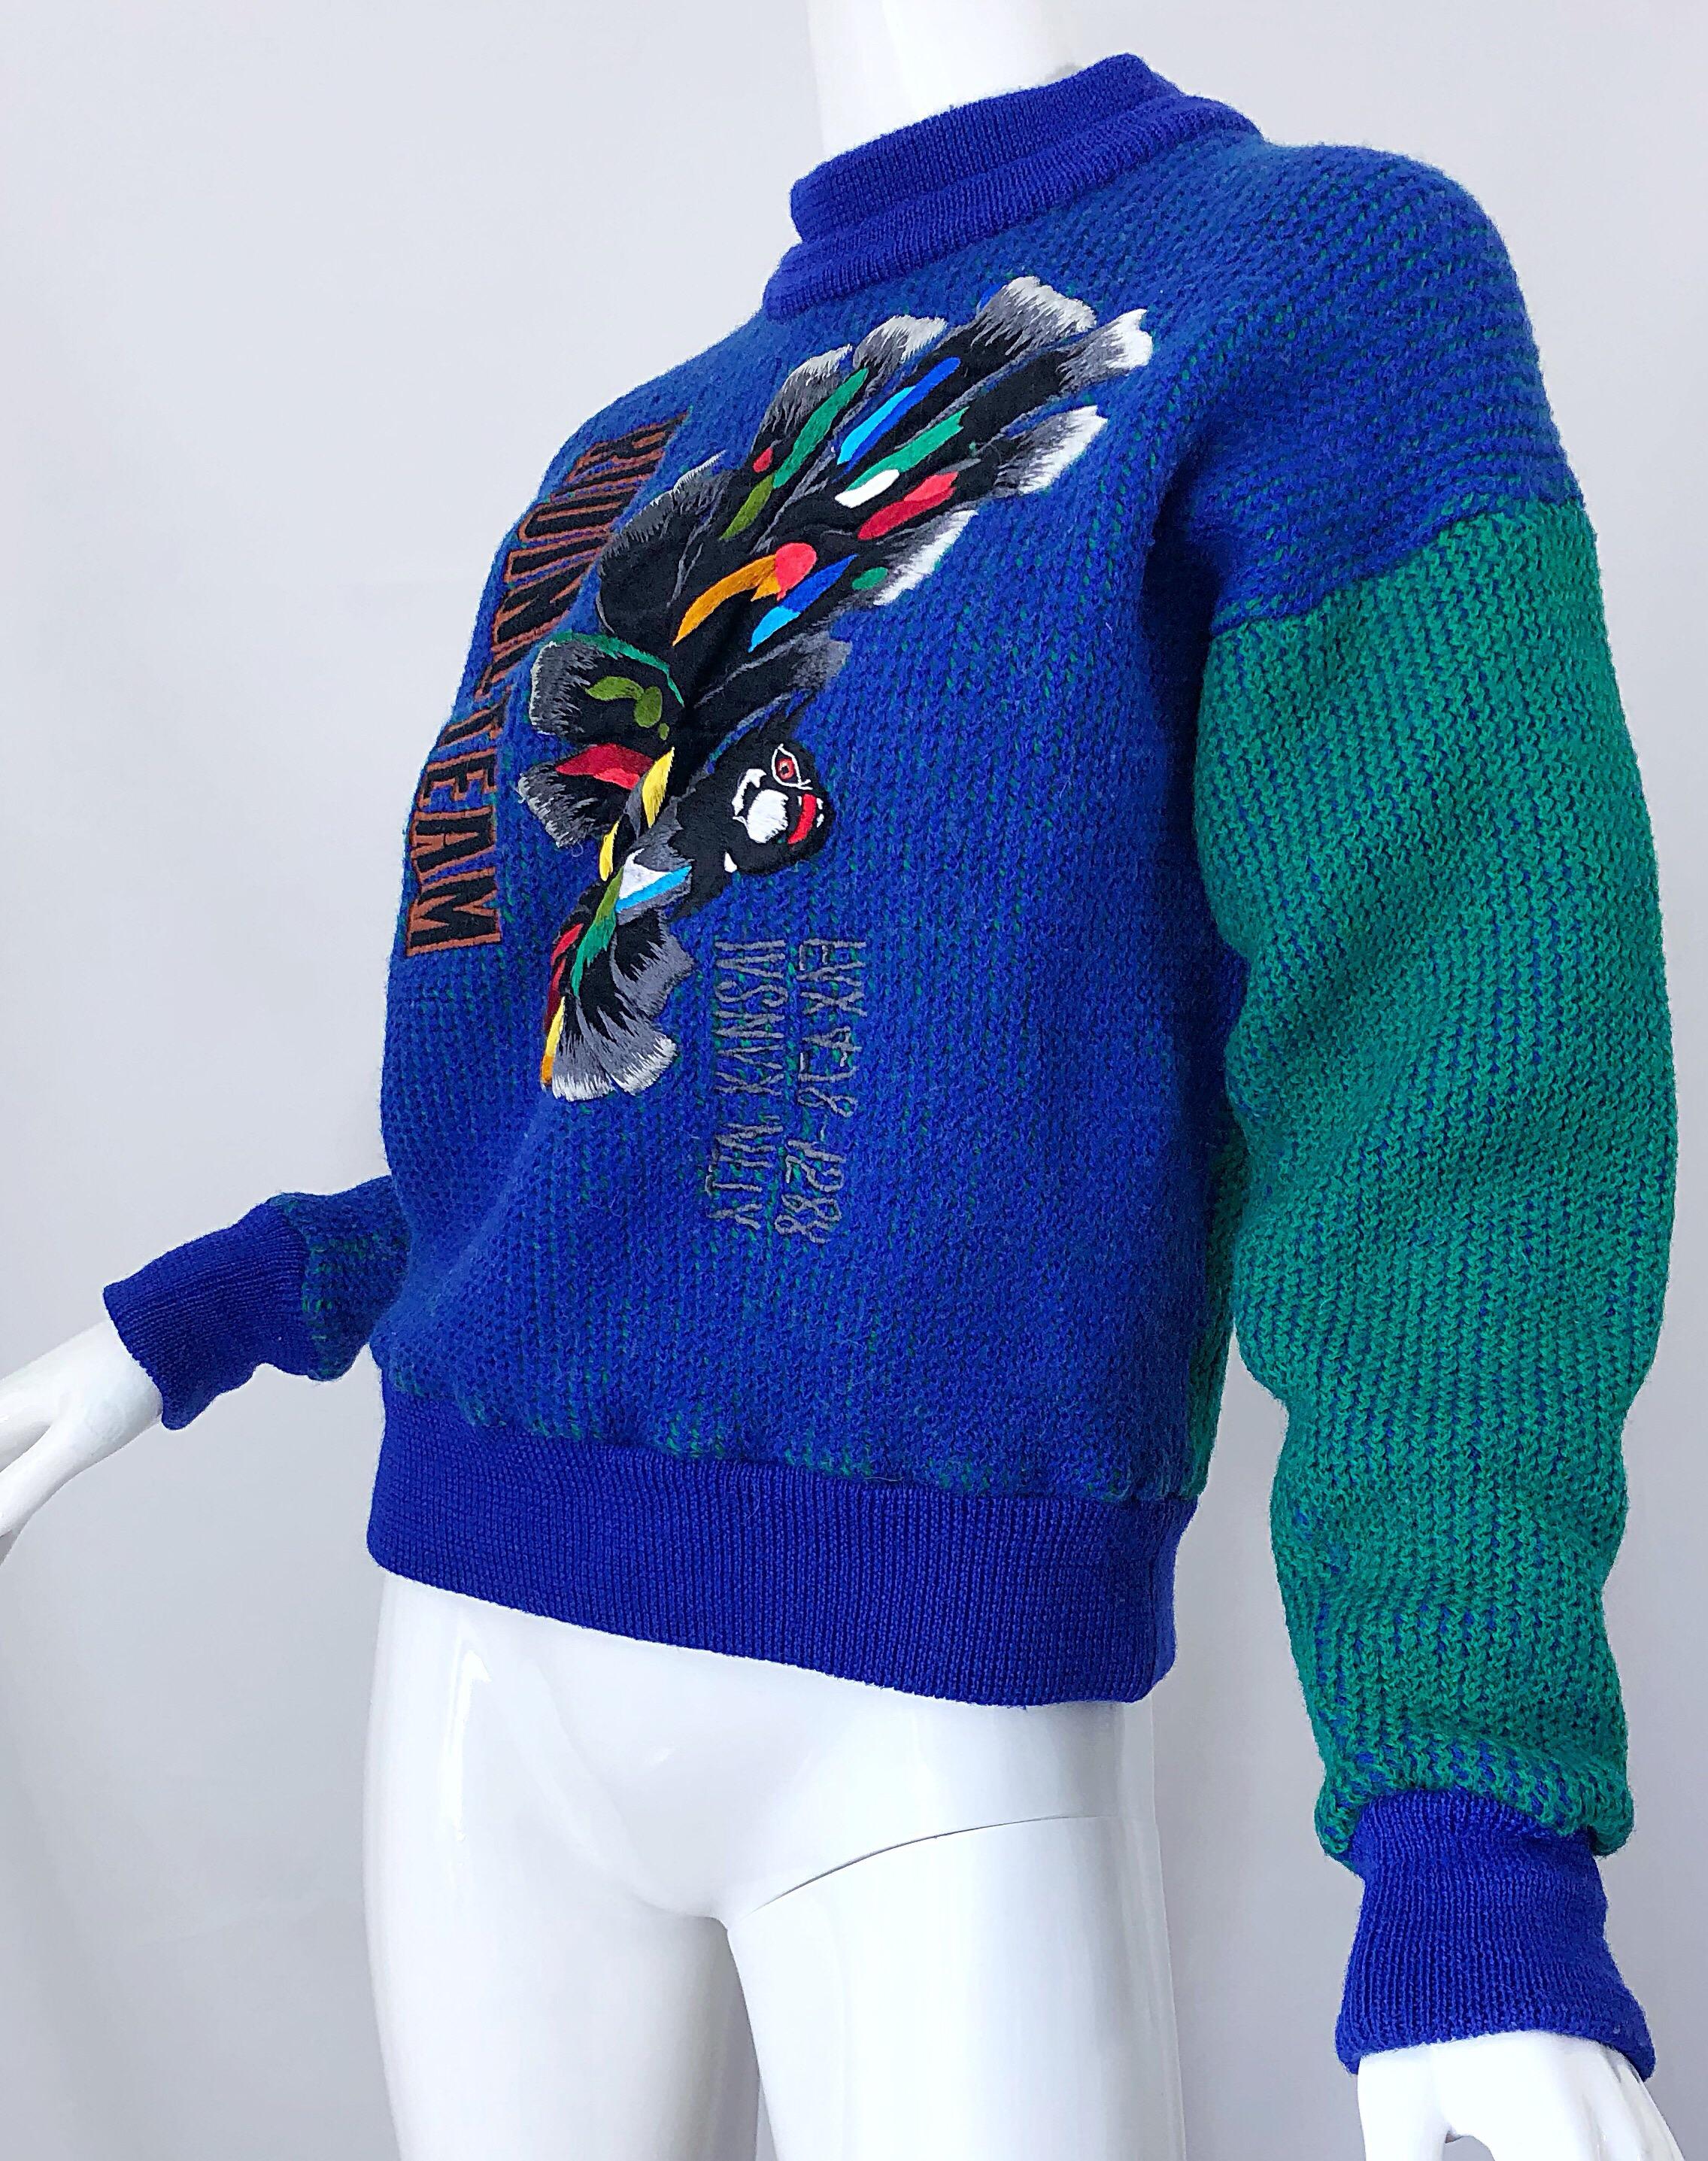 Kansai Yamamoto 1980s Riding Team Royal Blue Embroidered Novelty Wool Sweater For Sale 4